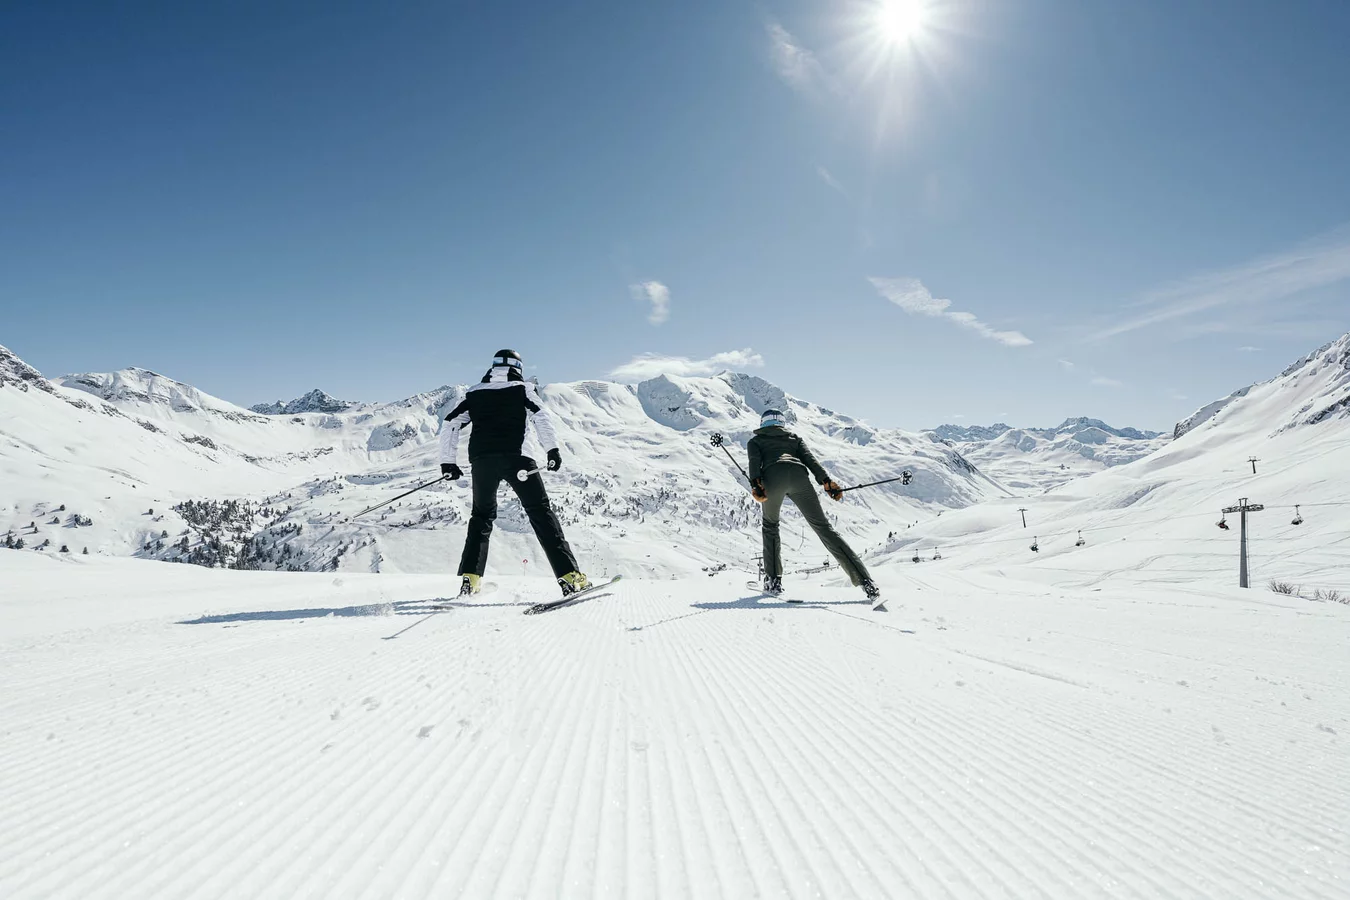 Ski Season Is Back! Here's Where to Stay and Play in the Alps This